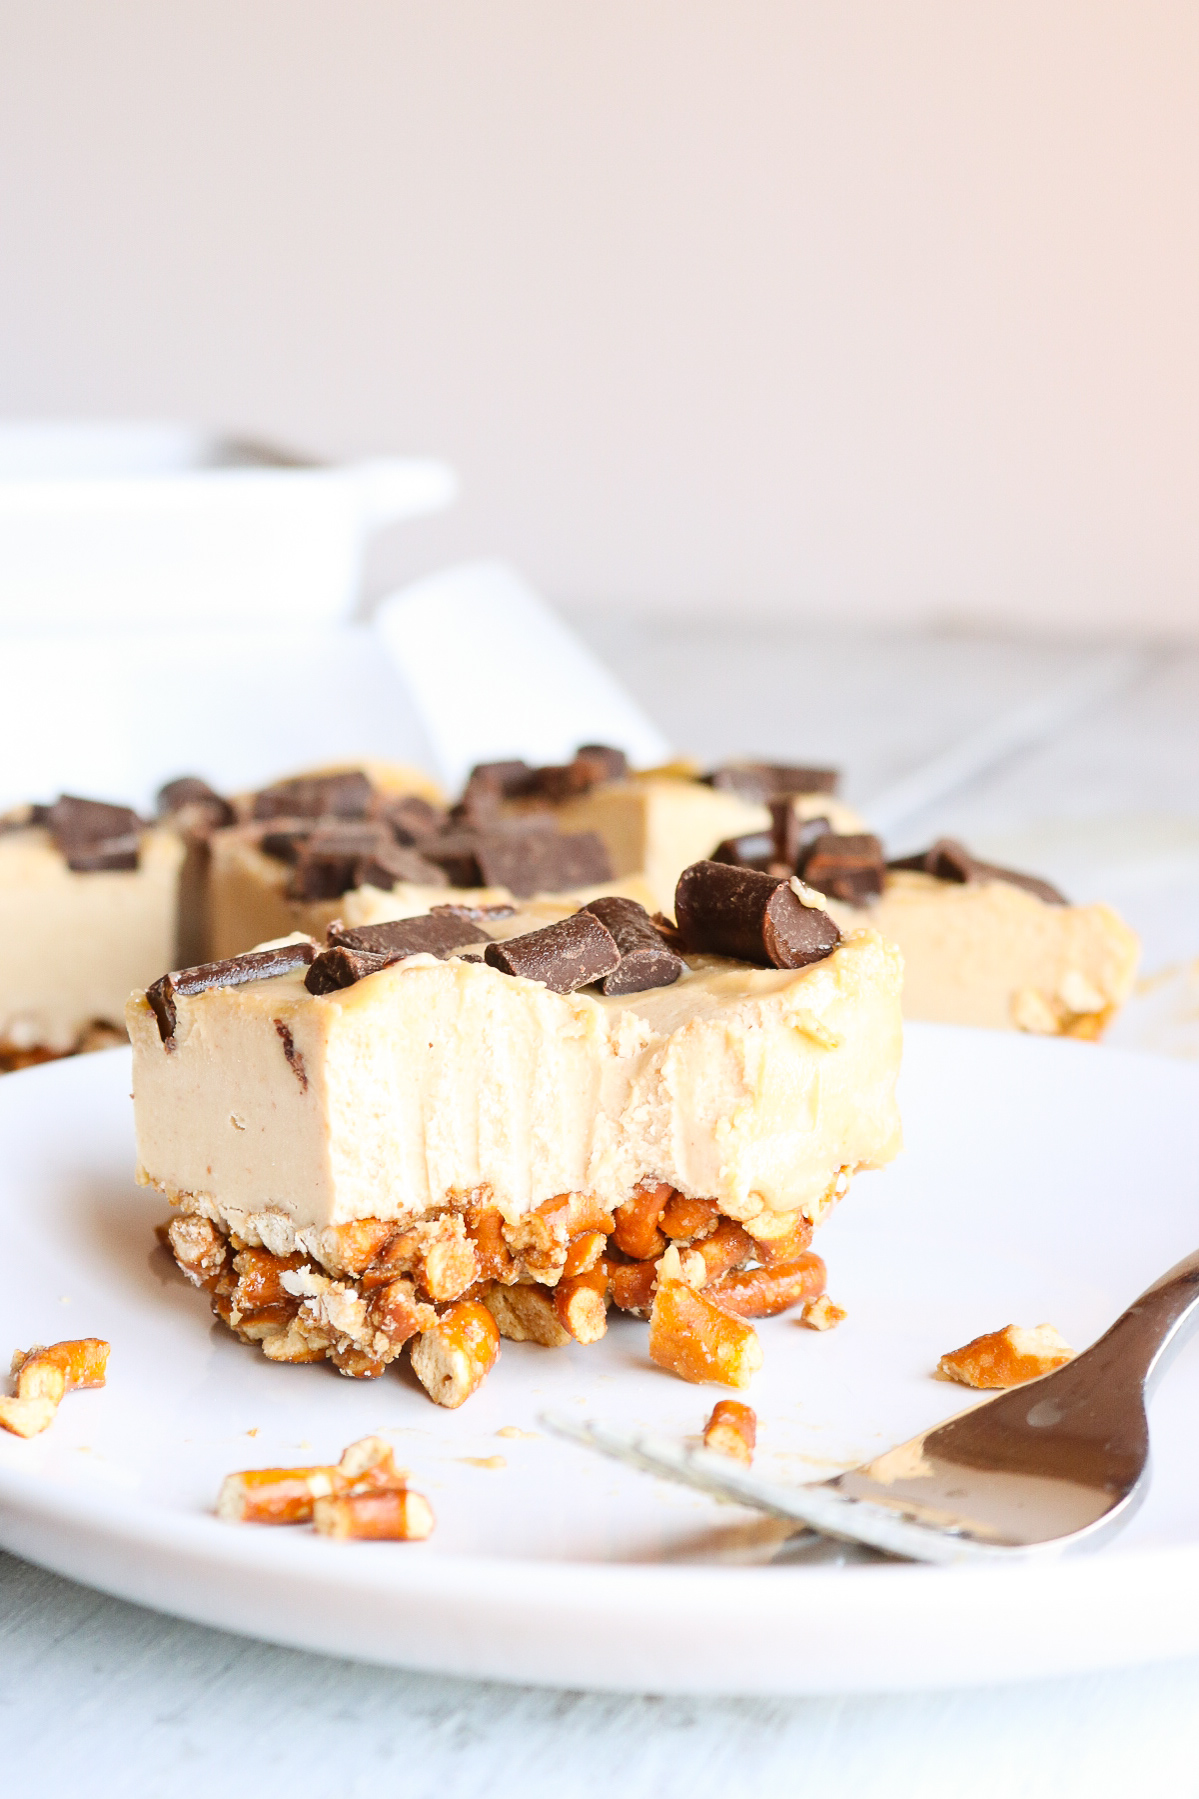 No Bake Vegan Peanut Butter Cheesecake with Pretzel Crust and Chocolate Chunks